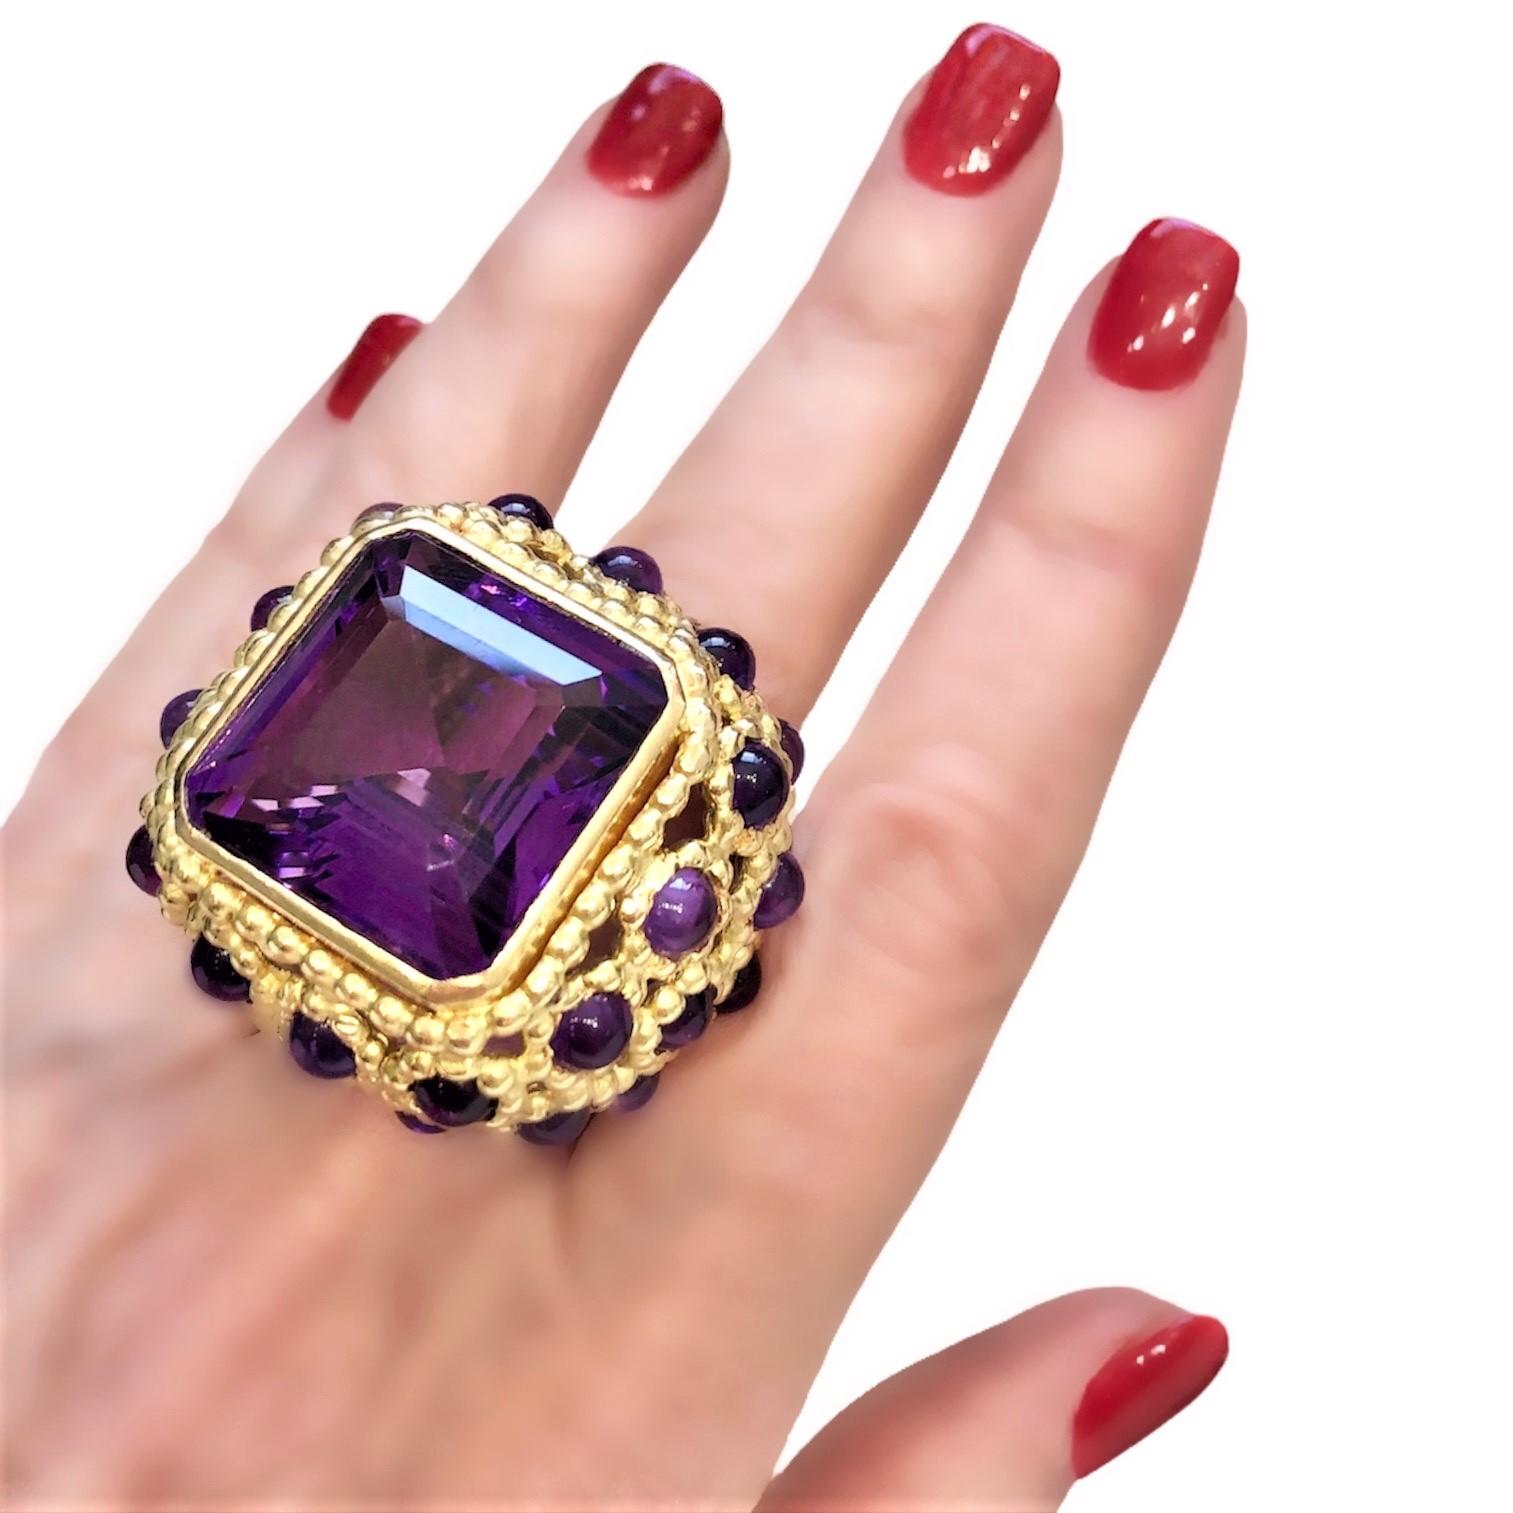 Elegant Grand Scale French Mid-20th Century 18k Gold and Amethyst Fashion Ring For Sale 3